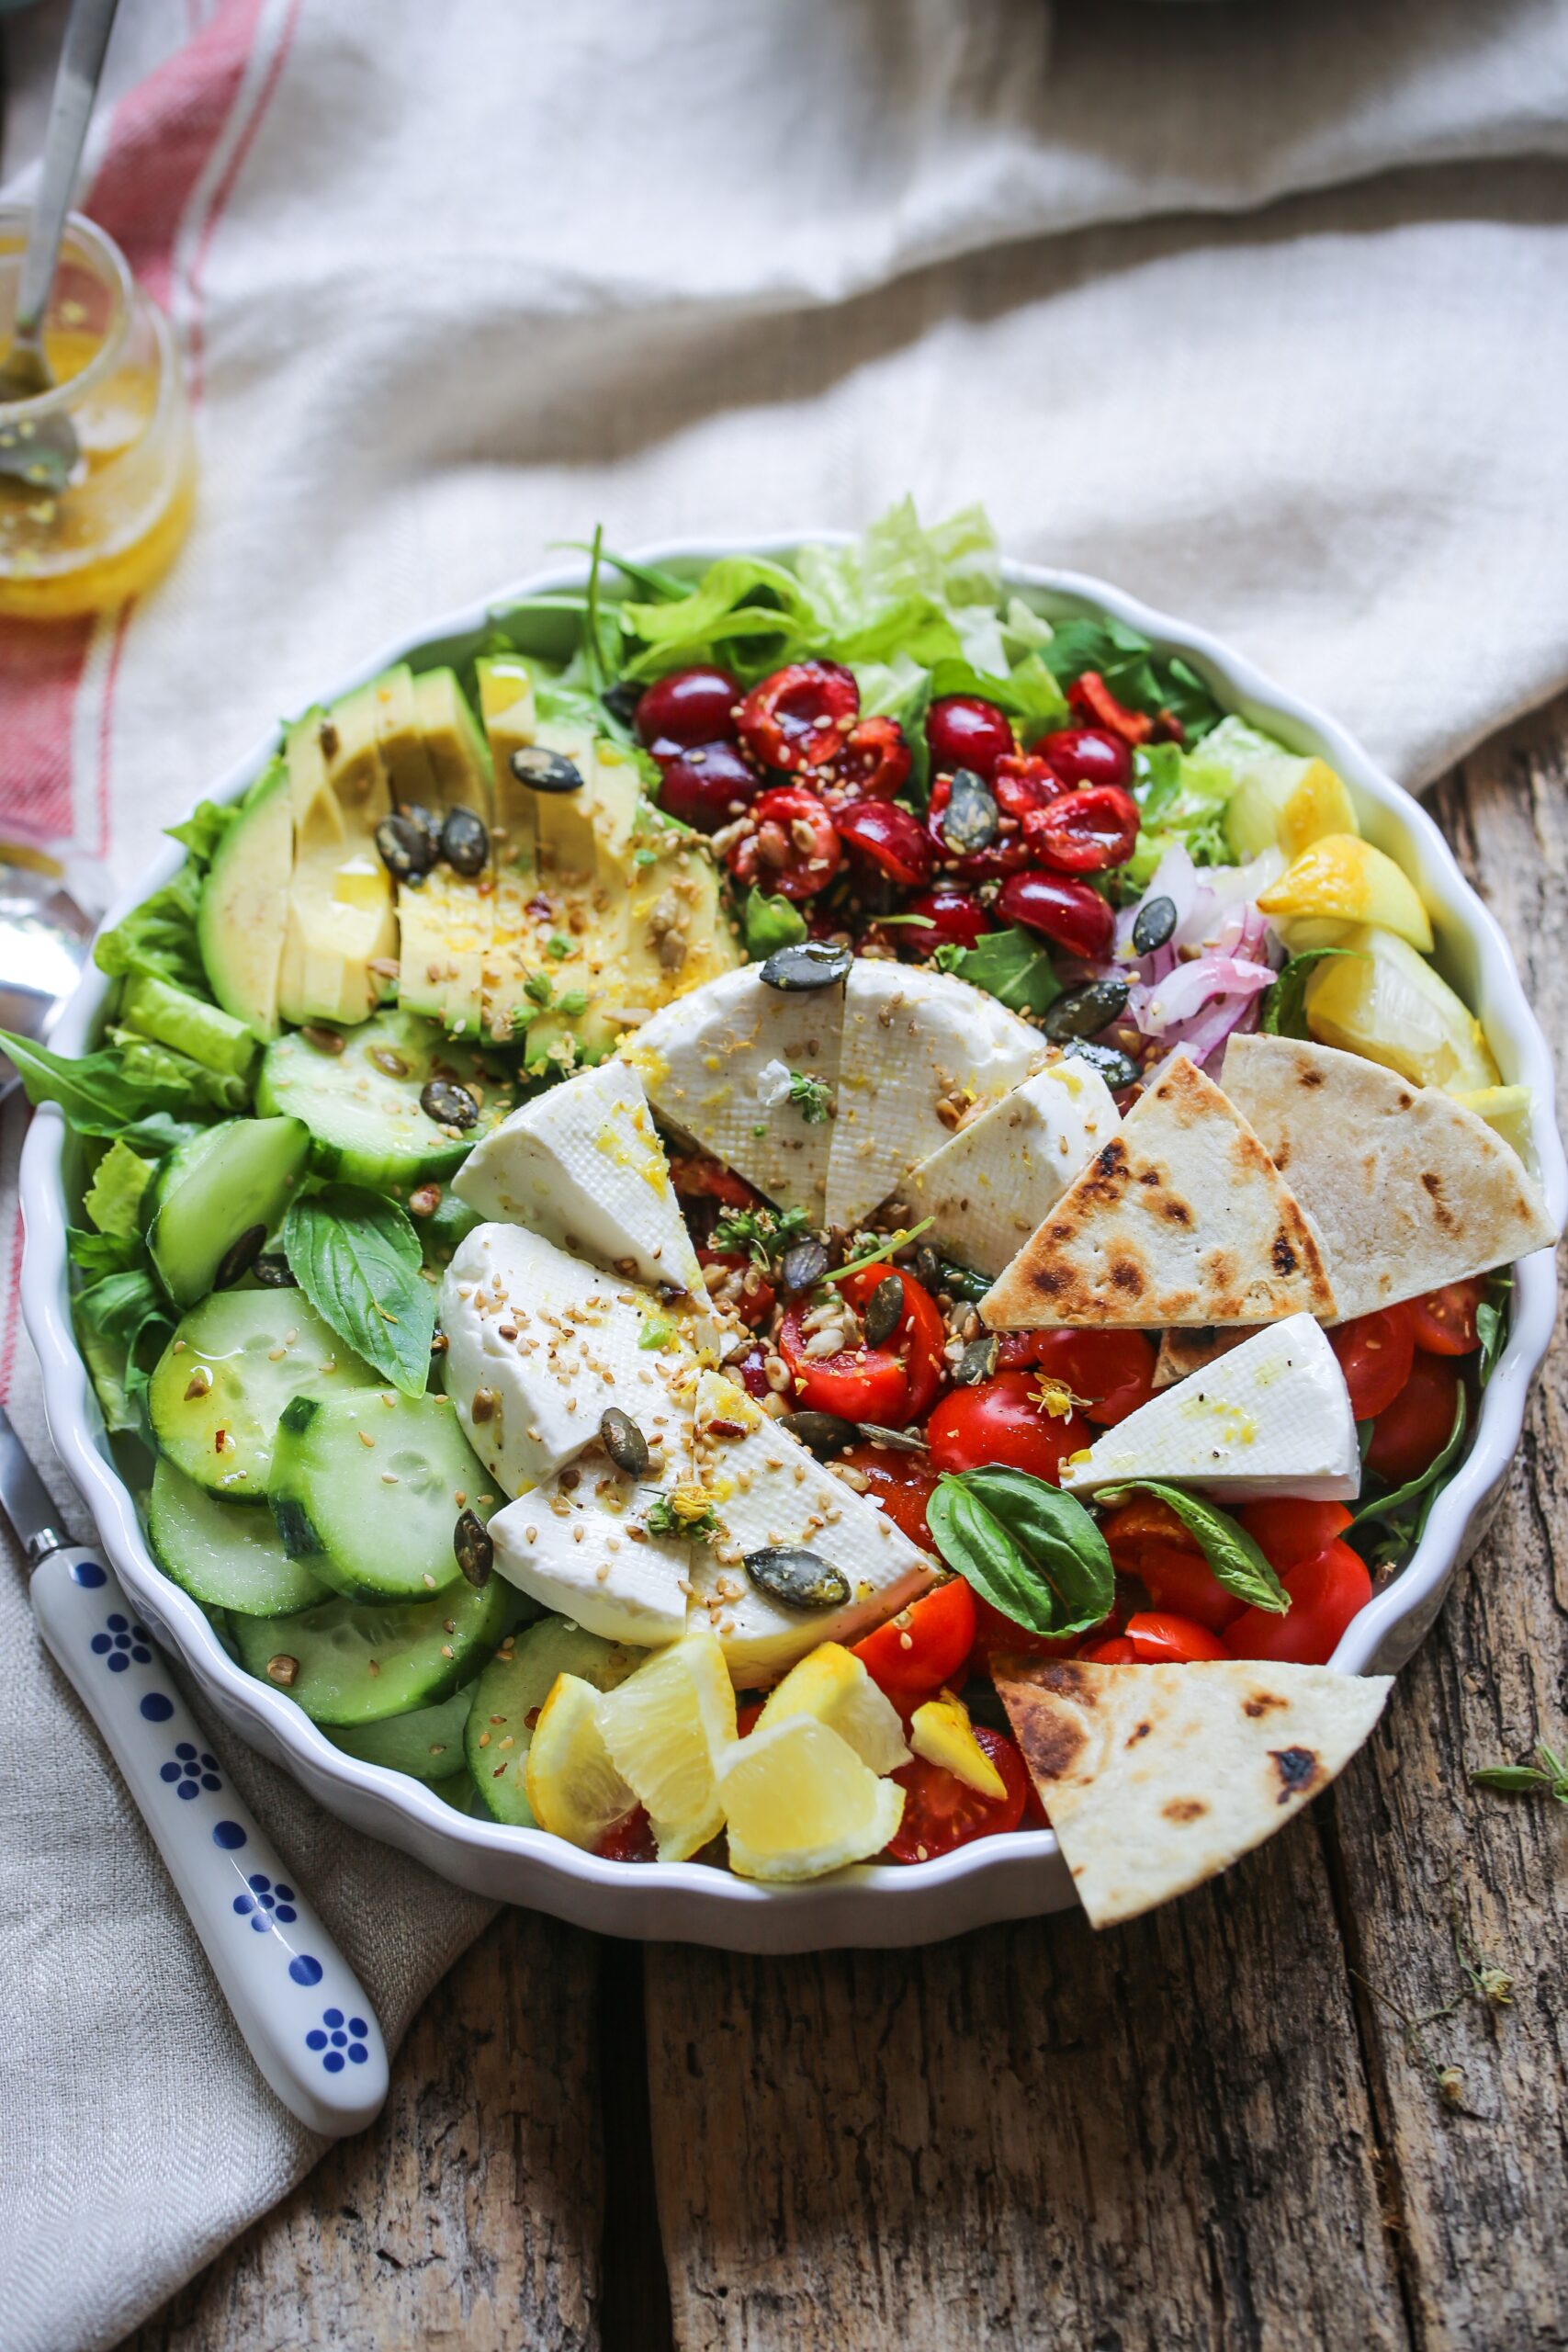 15 Mouthwatering Salads Everyone Will Want to Eat